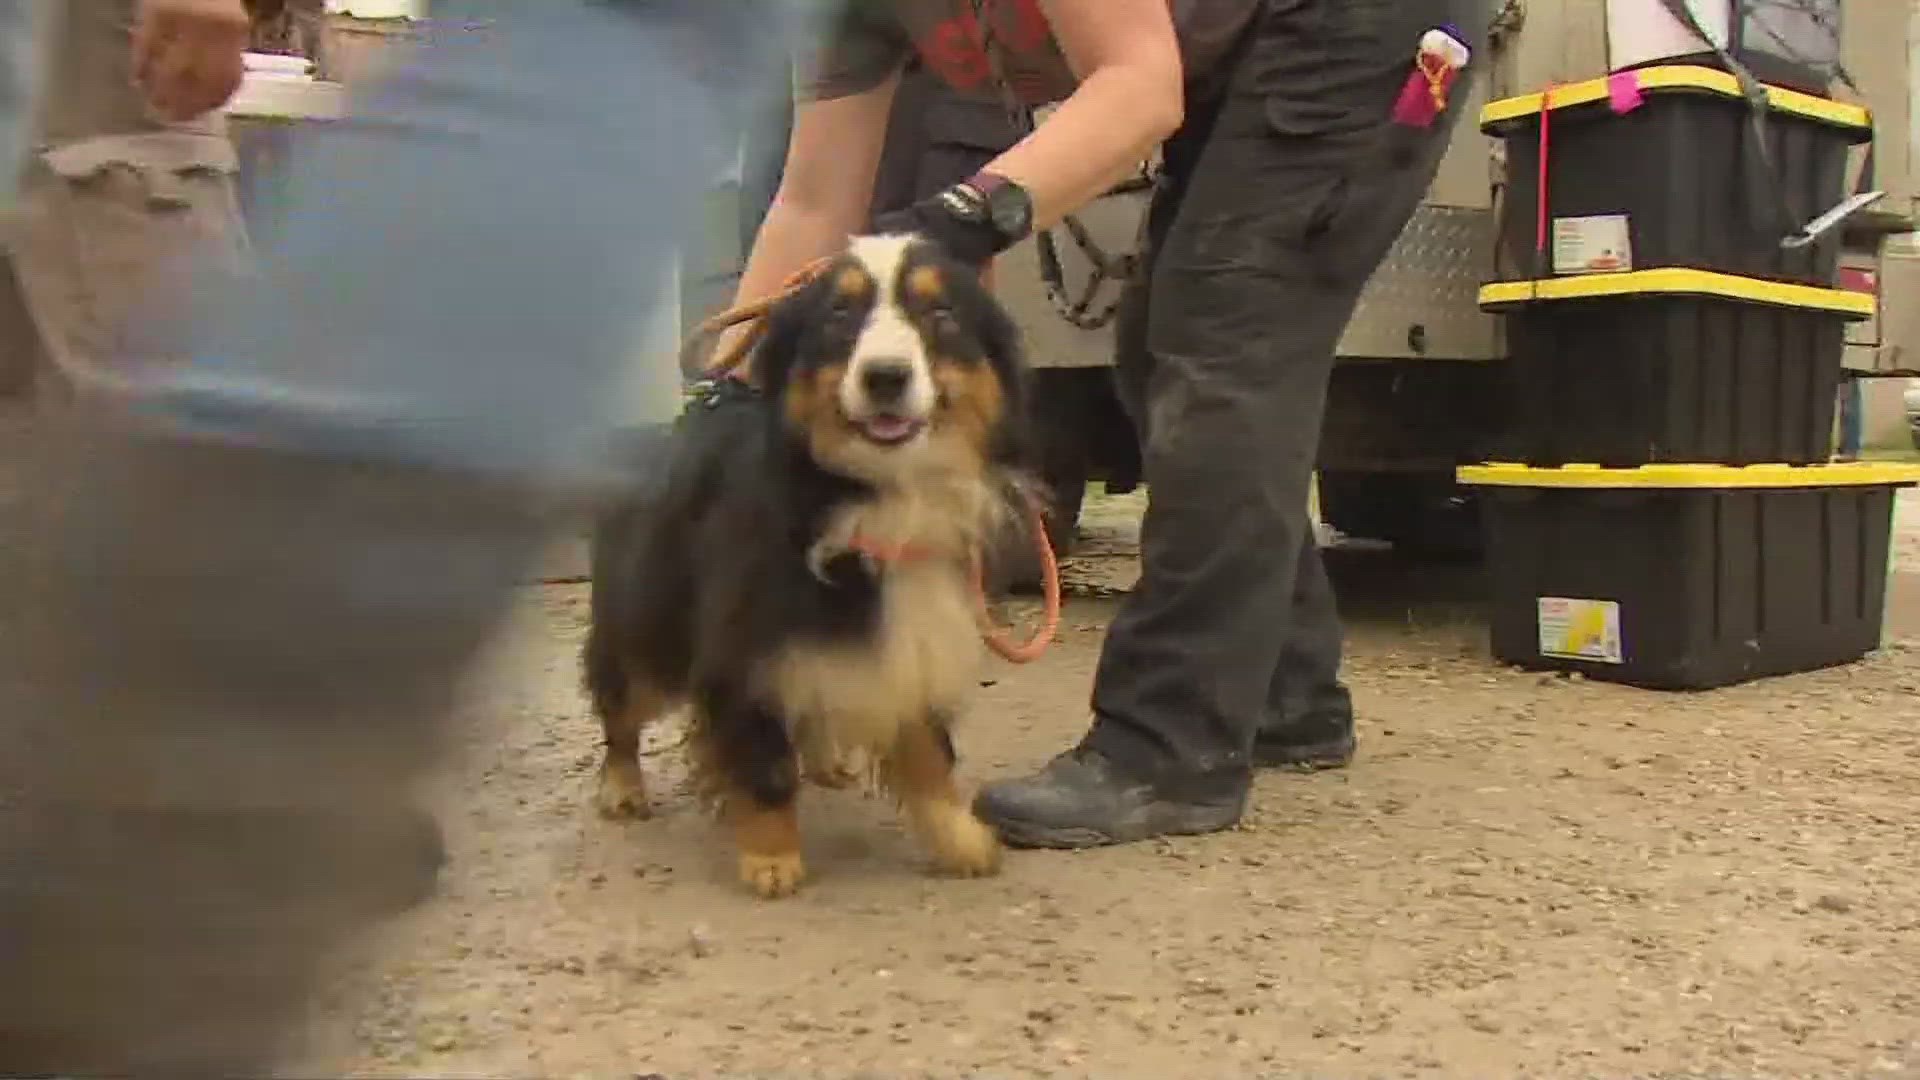 The All American Dog Shelter and ASPCA moved dogs displaced in recent storms to a new shelter.